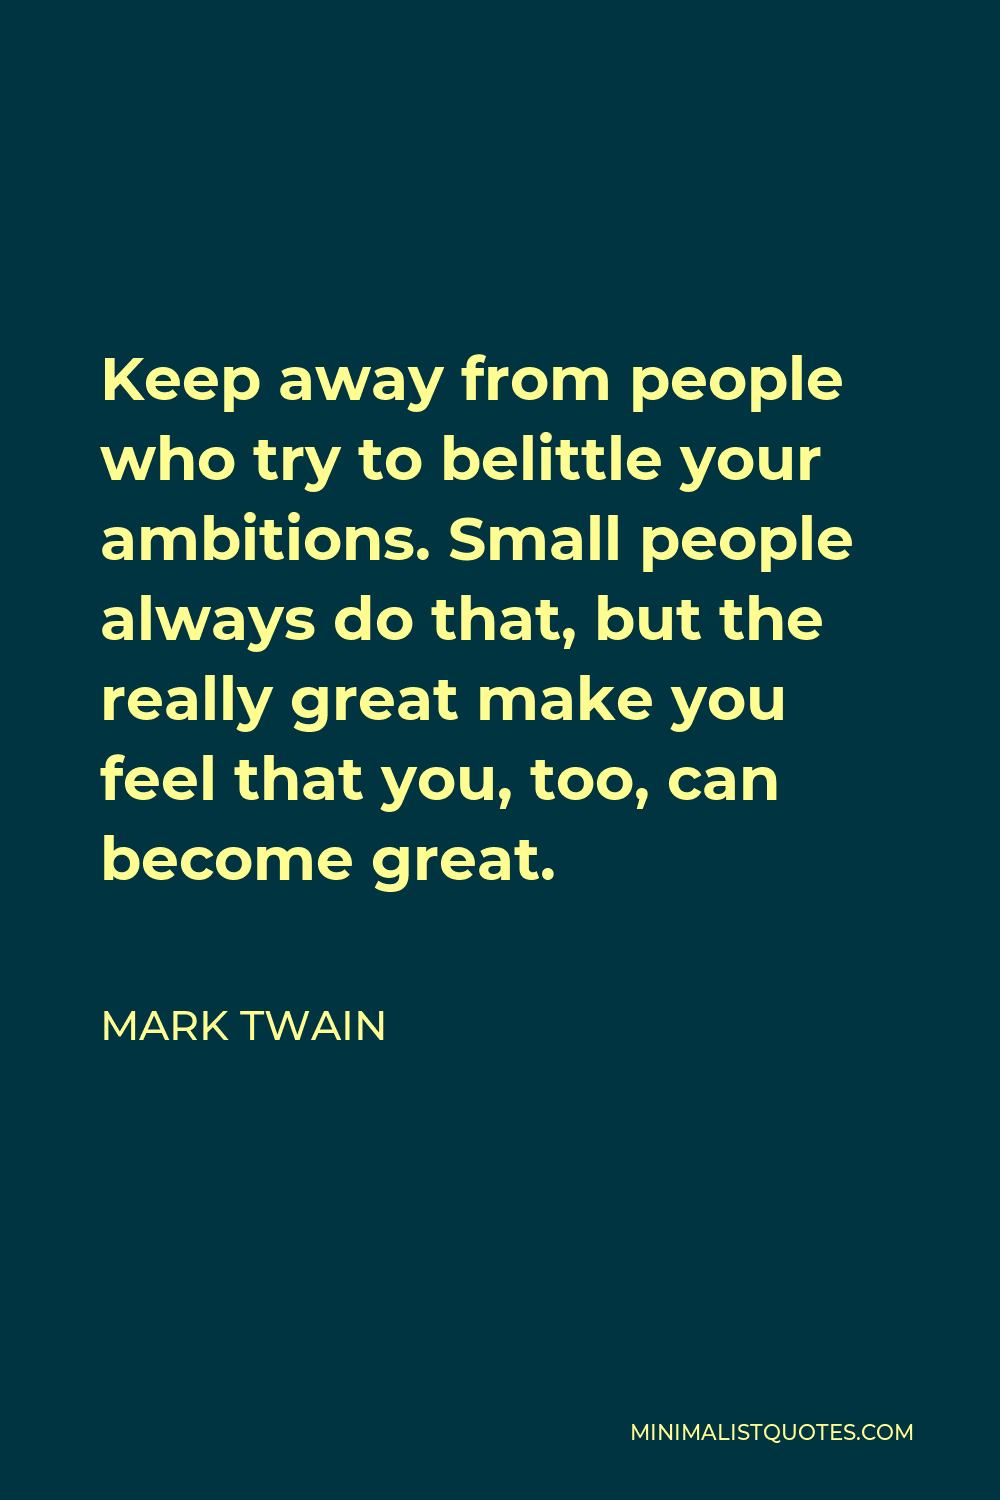 Mark Twain Quote - Keep away from people who try to belittle your ambitions. Small people always do that, but the really great make you feel that you, too, can become great.